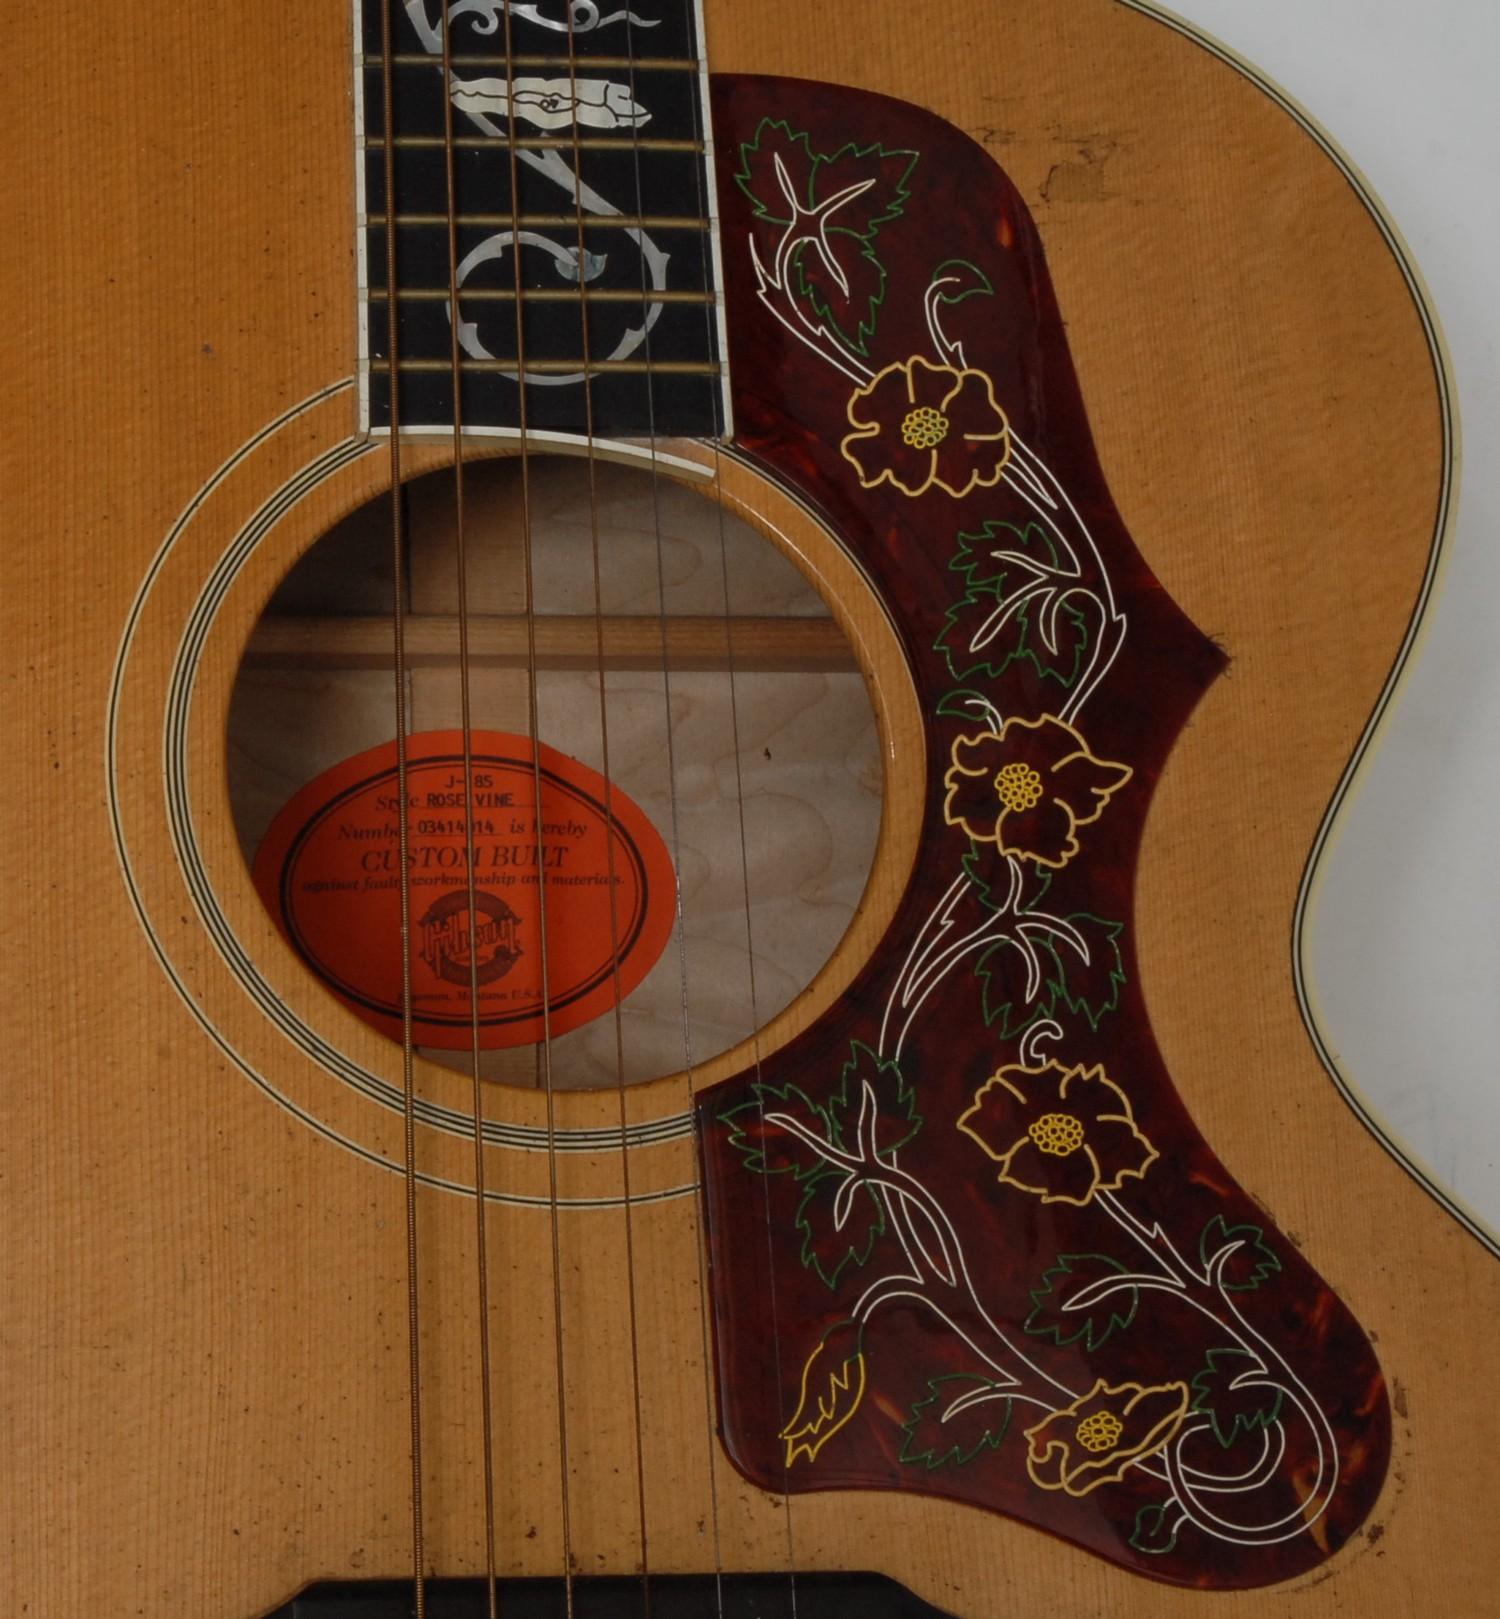 A Gibson J-185 Rose Vine Acoustic guitar, Bozeman, Montana USA, figured maple body back and sides, - Image 16 of 18